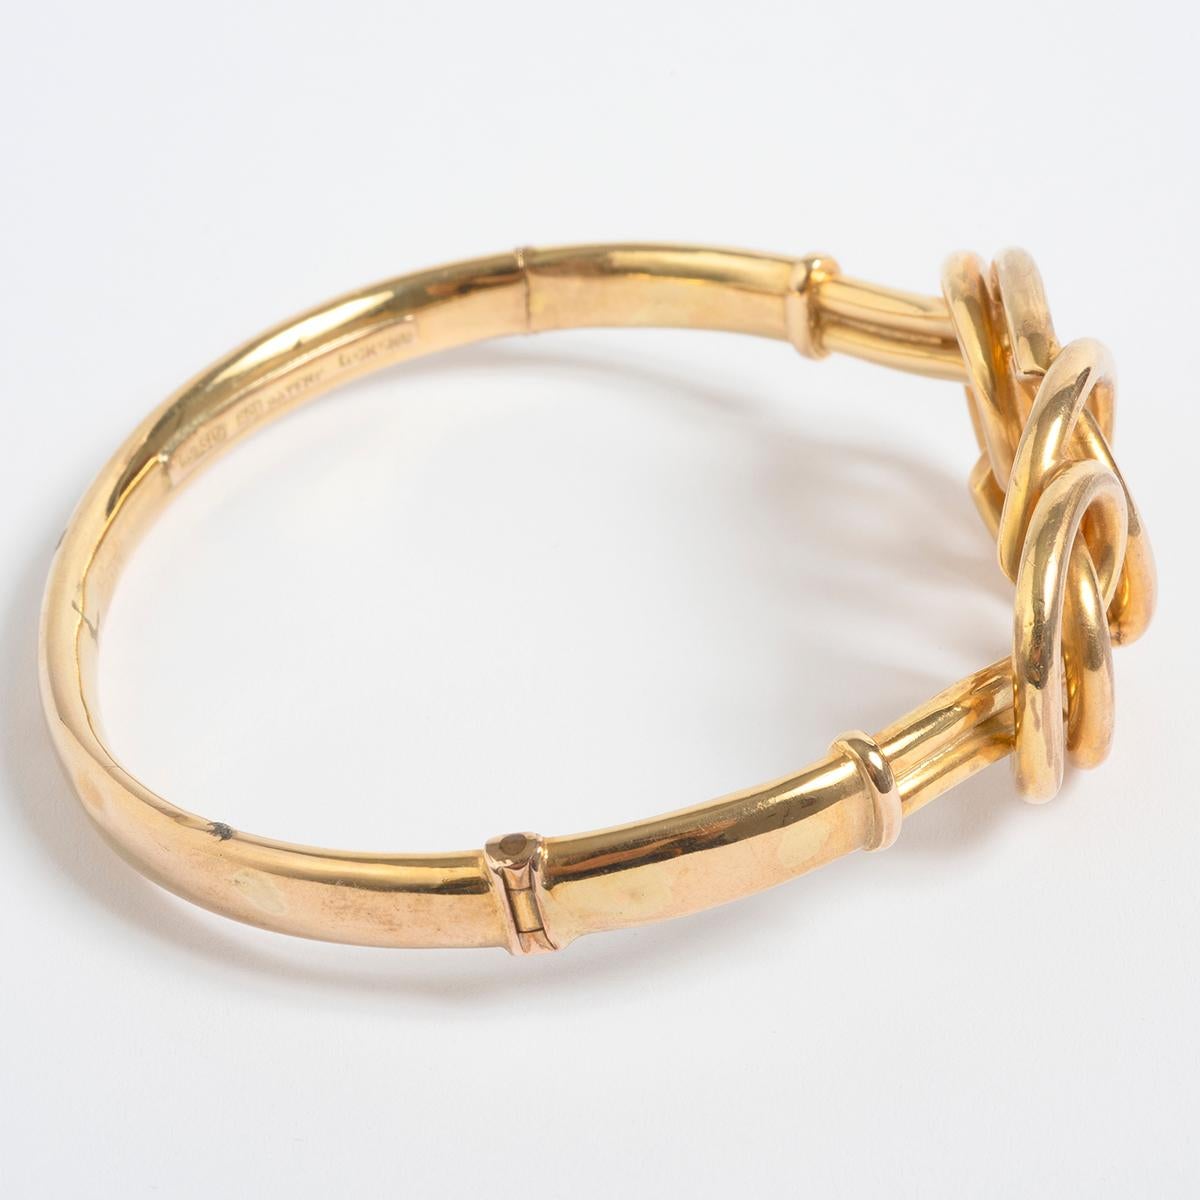 A unique piece within our carefully curated Vintage & Prestige fine jewellery collection, we are delighted to present the following: This beautifully designed torque bangle measures 60mm x 55mm and is set in 9K yellow gold. 